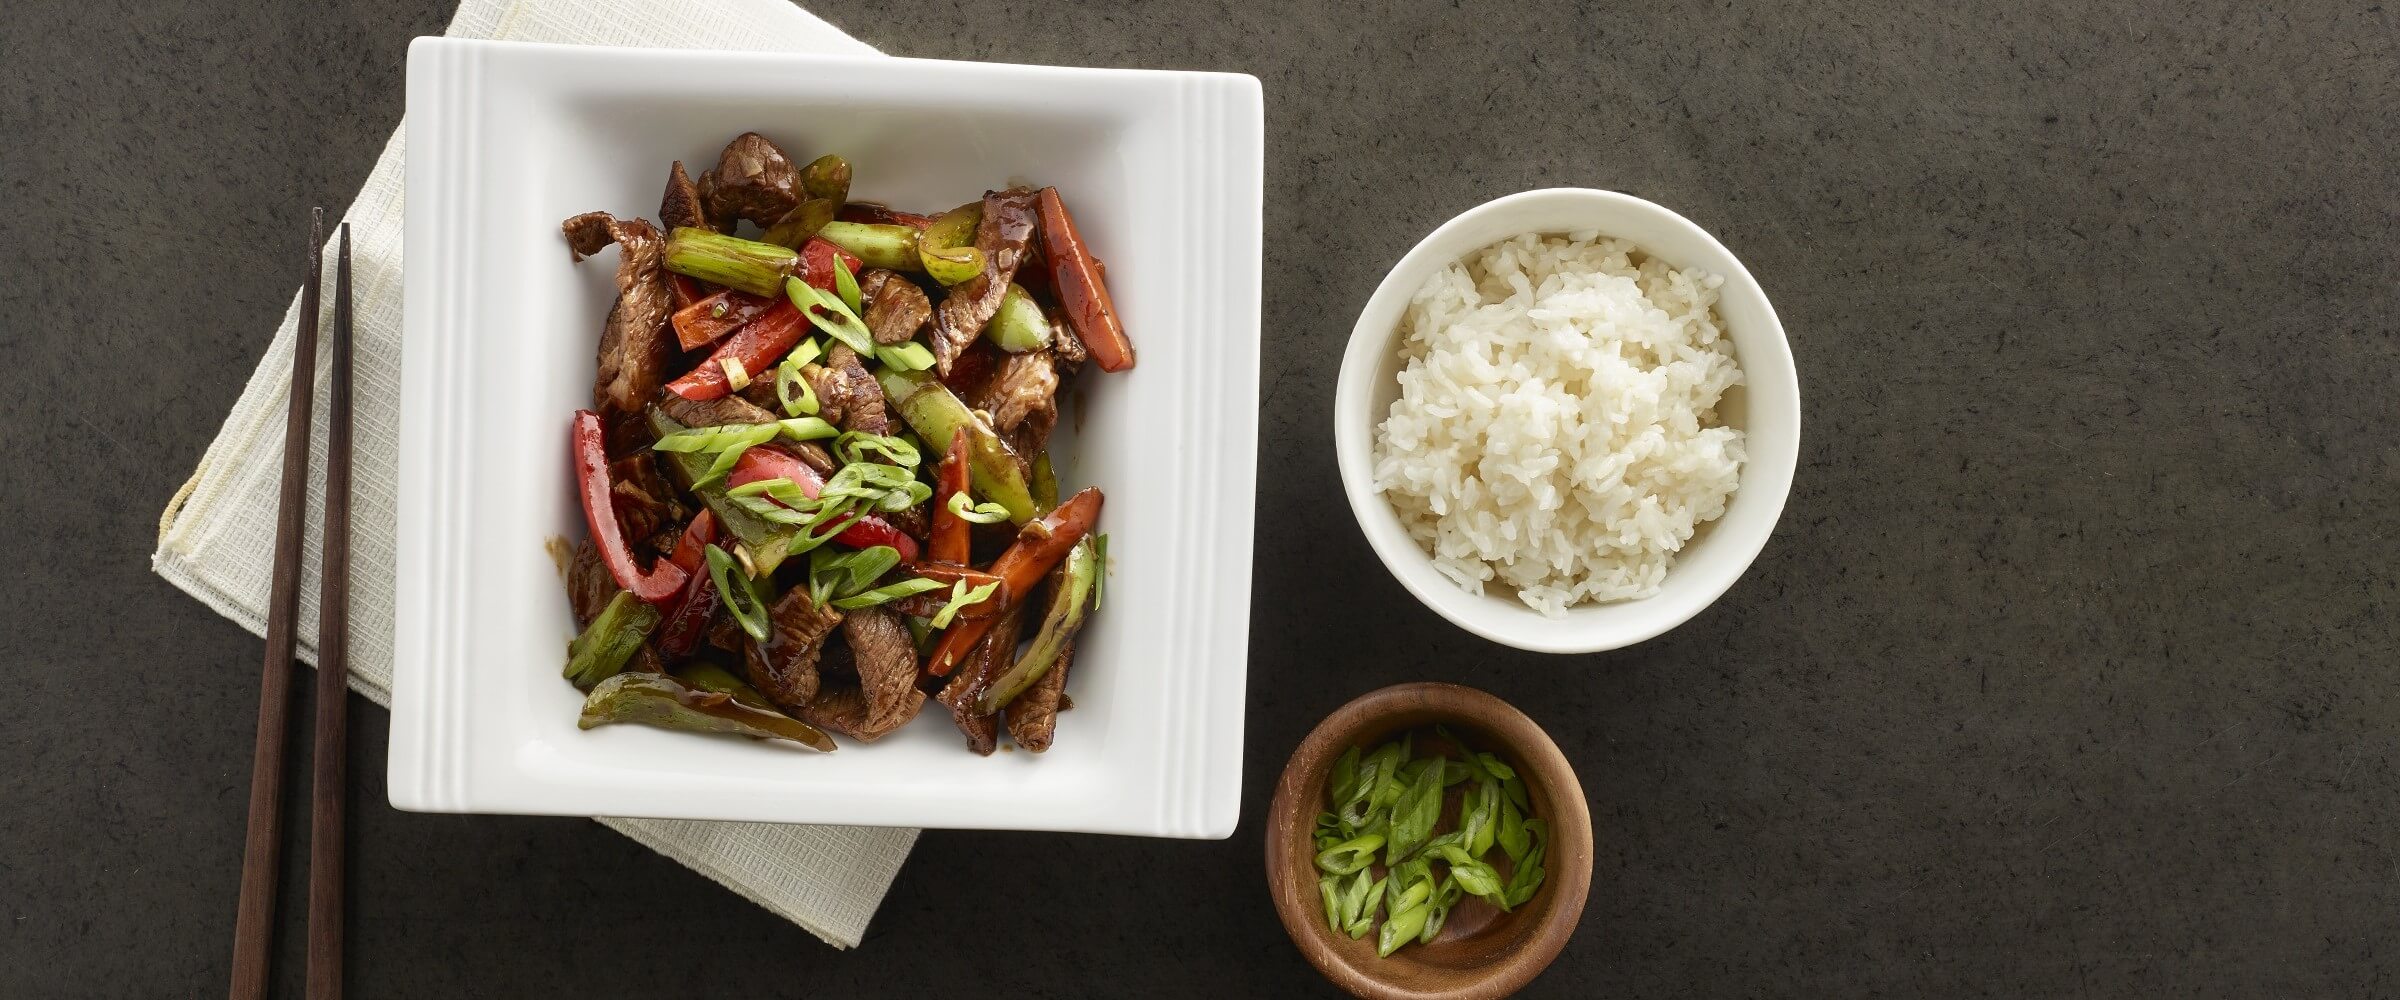 szechuan beef stir fry beef in white bowl with side of rice and green onions